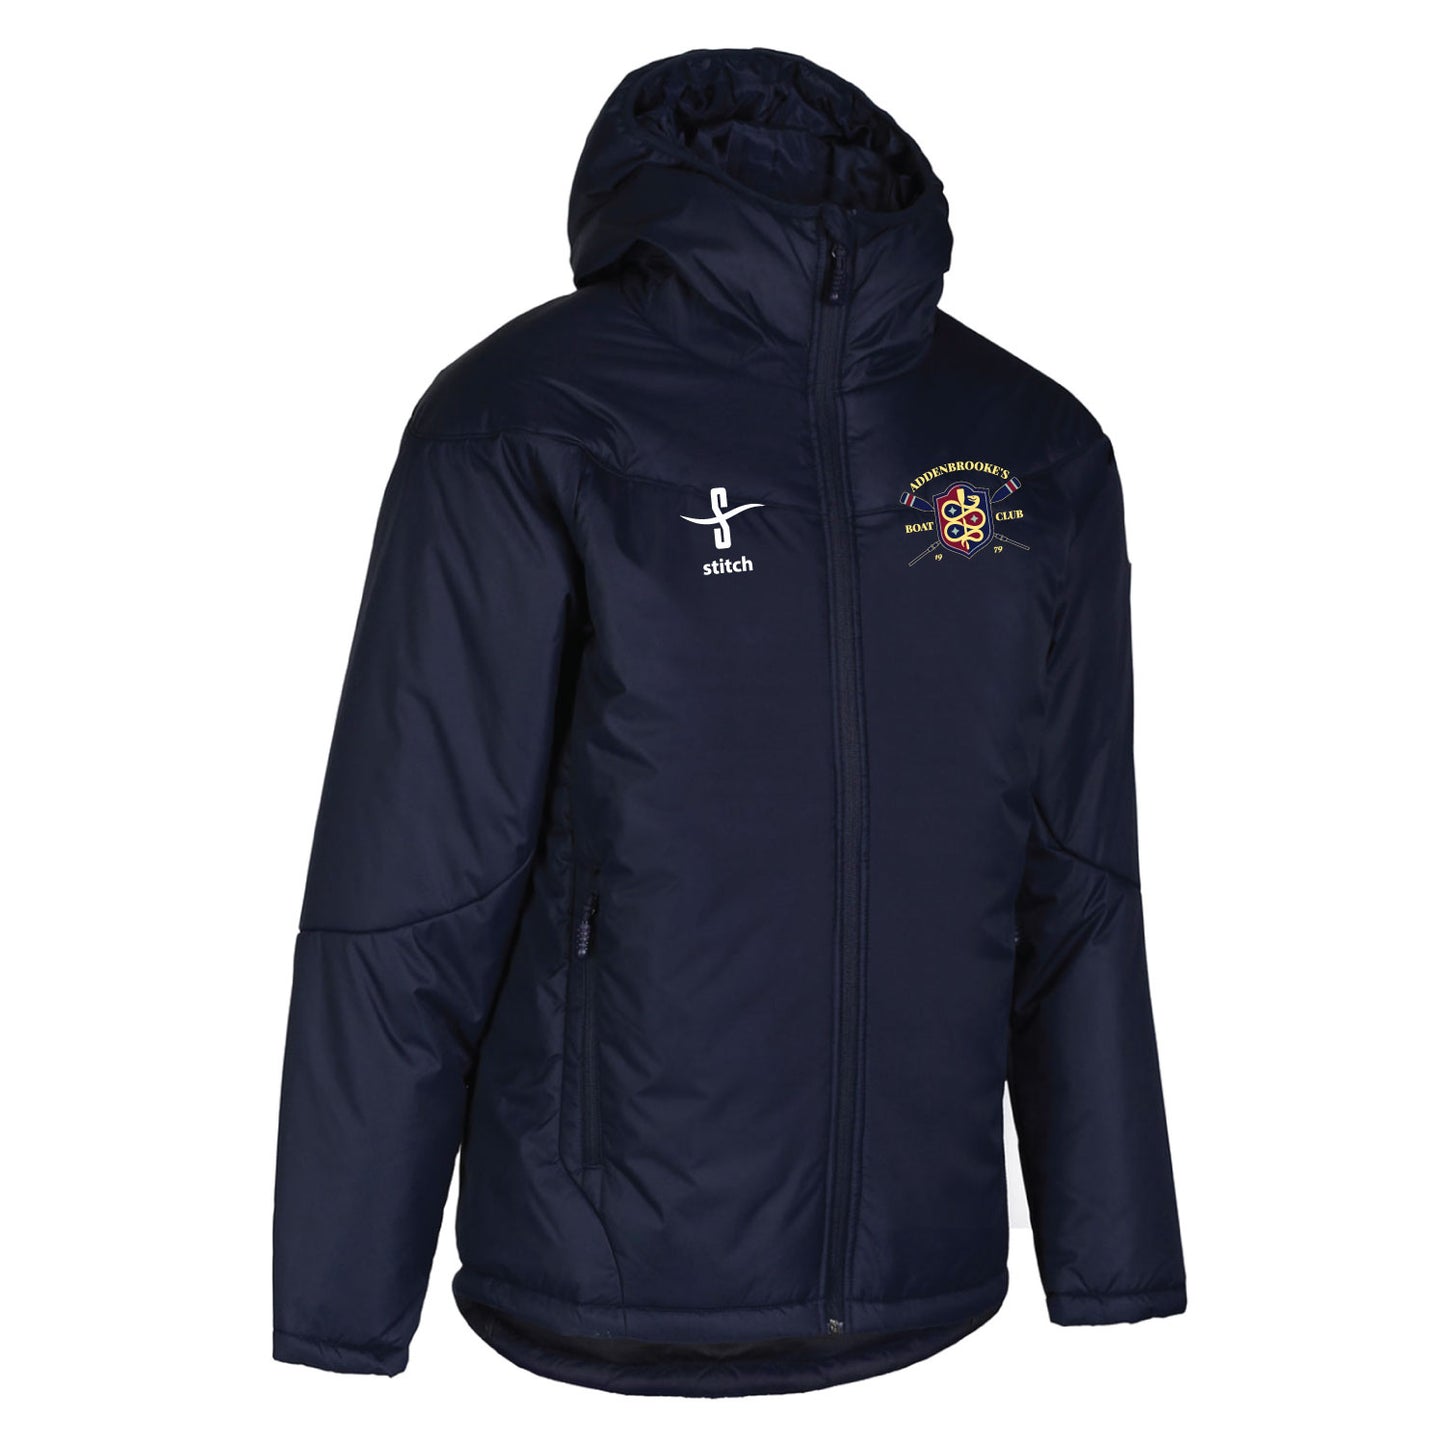 Addenbrooke's Boat Club Thermal Contoured Leisure Jacket